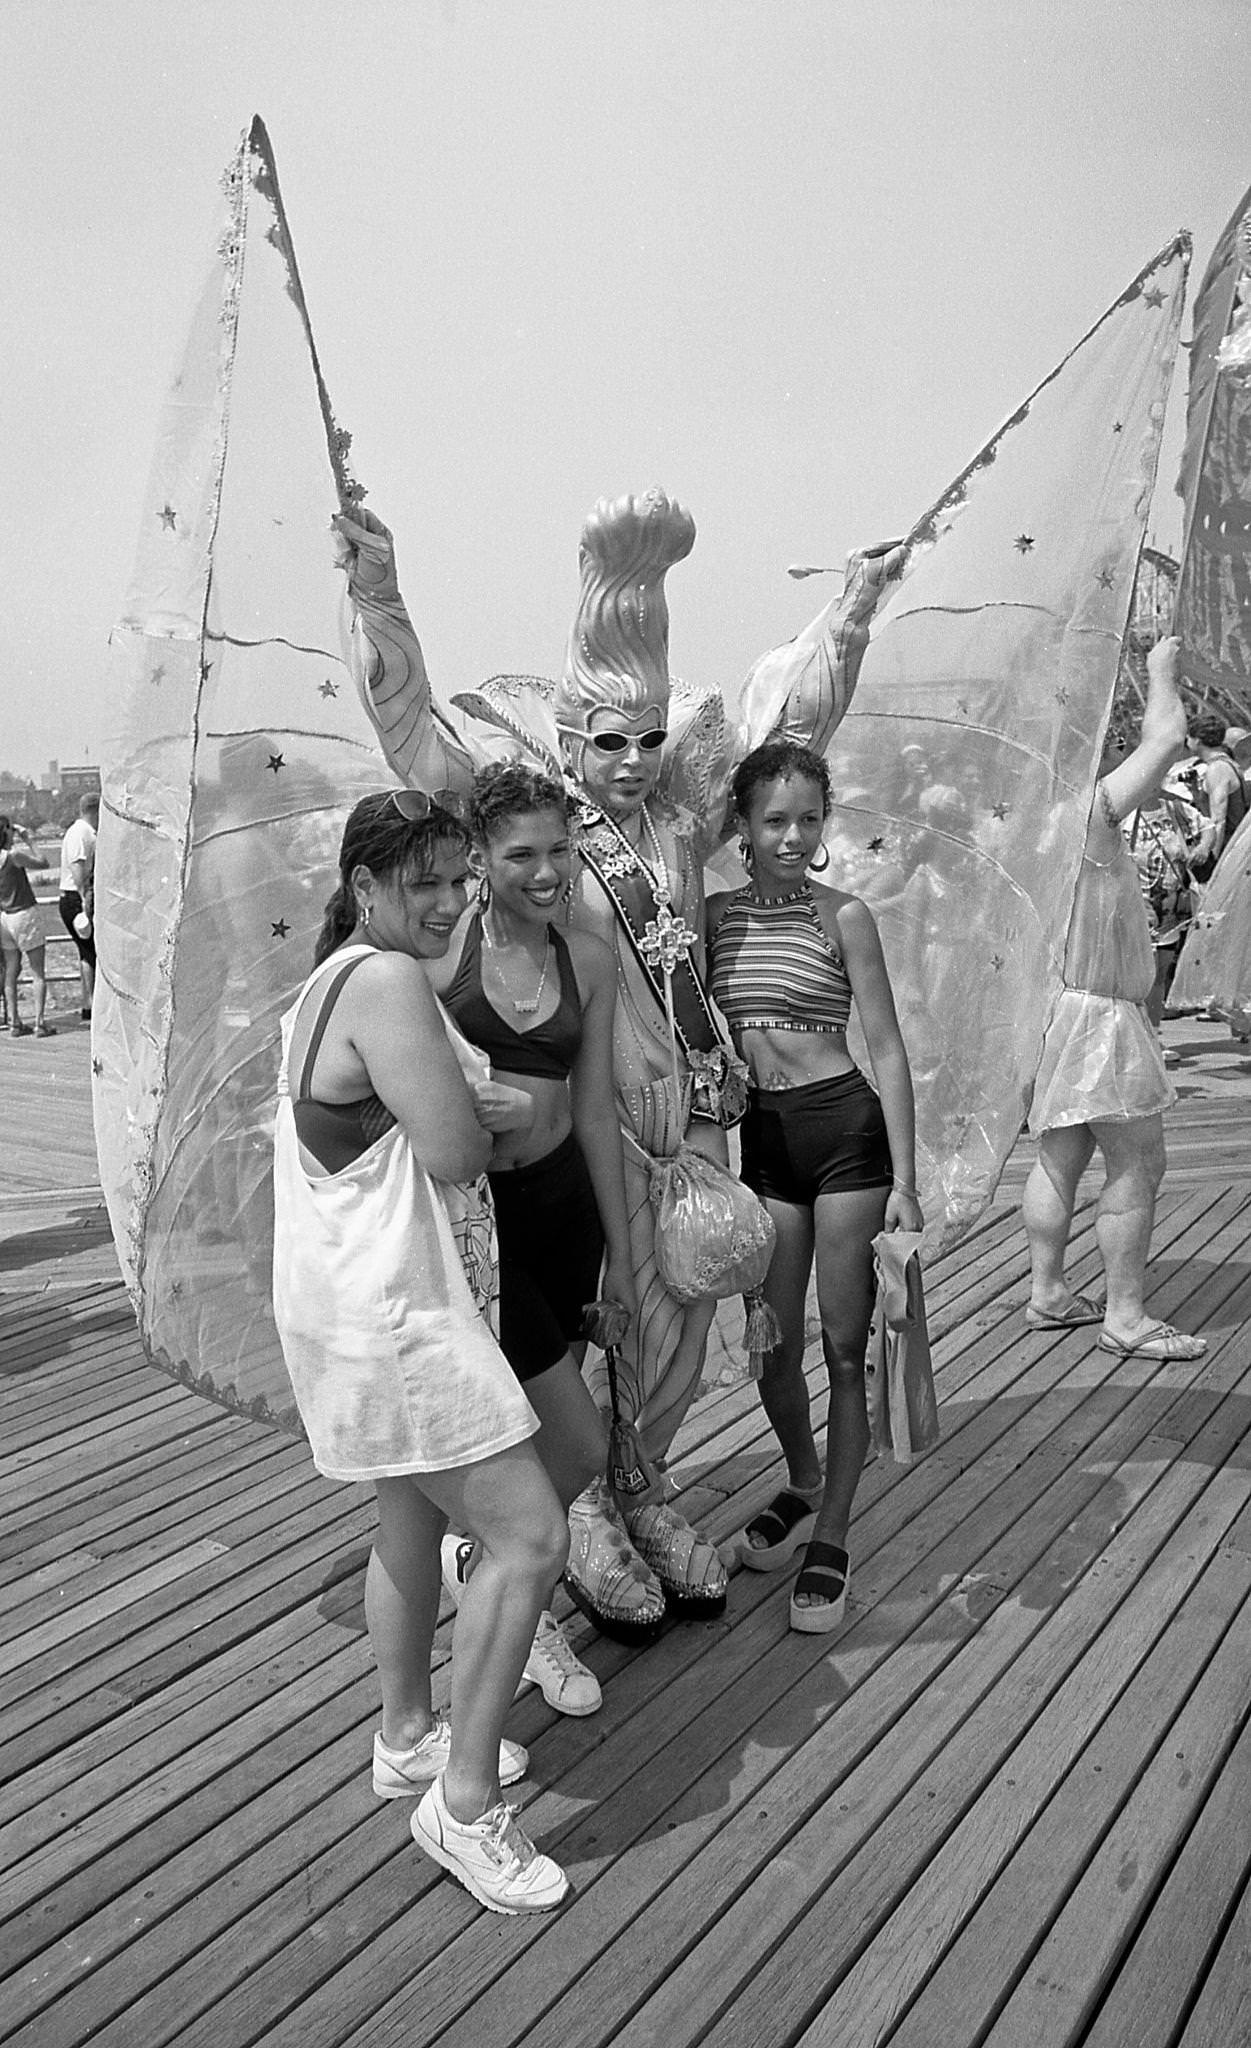 Women Pose With Man In Winged Costume At Coney Island Mermaid Parade, 1997